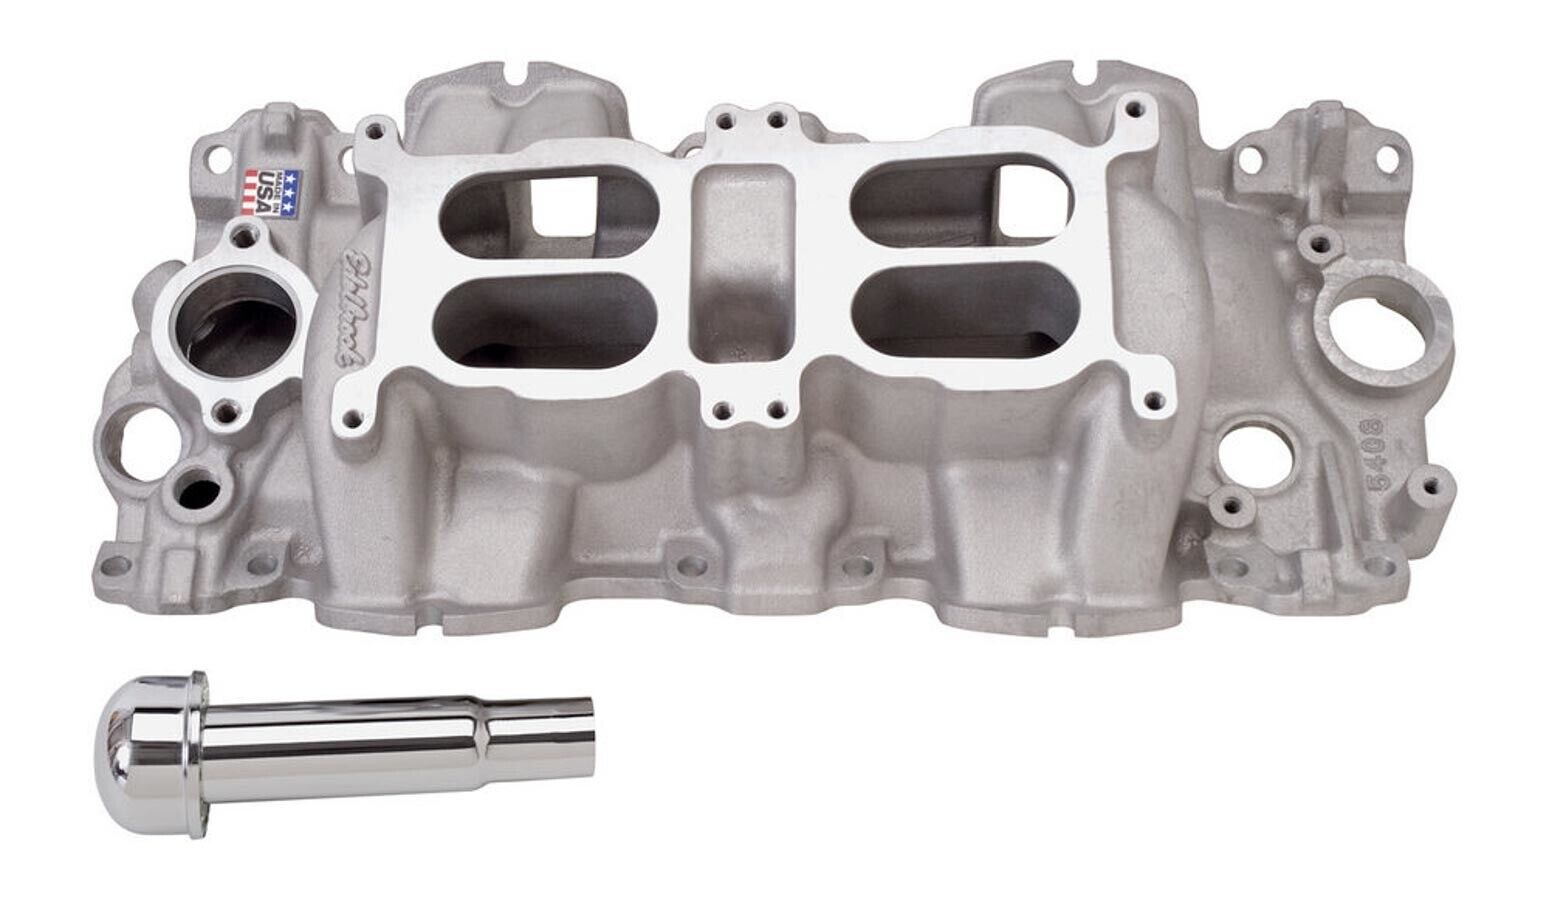 Performer RPM Dual-Quad Large Port Intake Manifold for Big Block Chevy 348 409